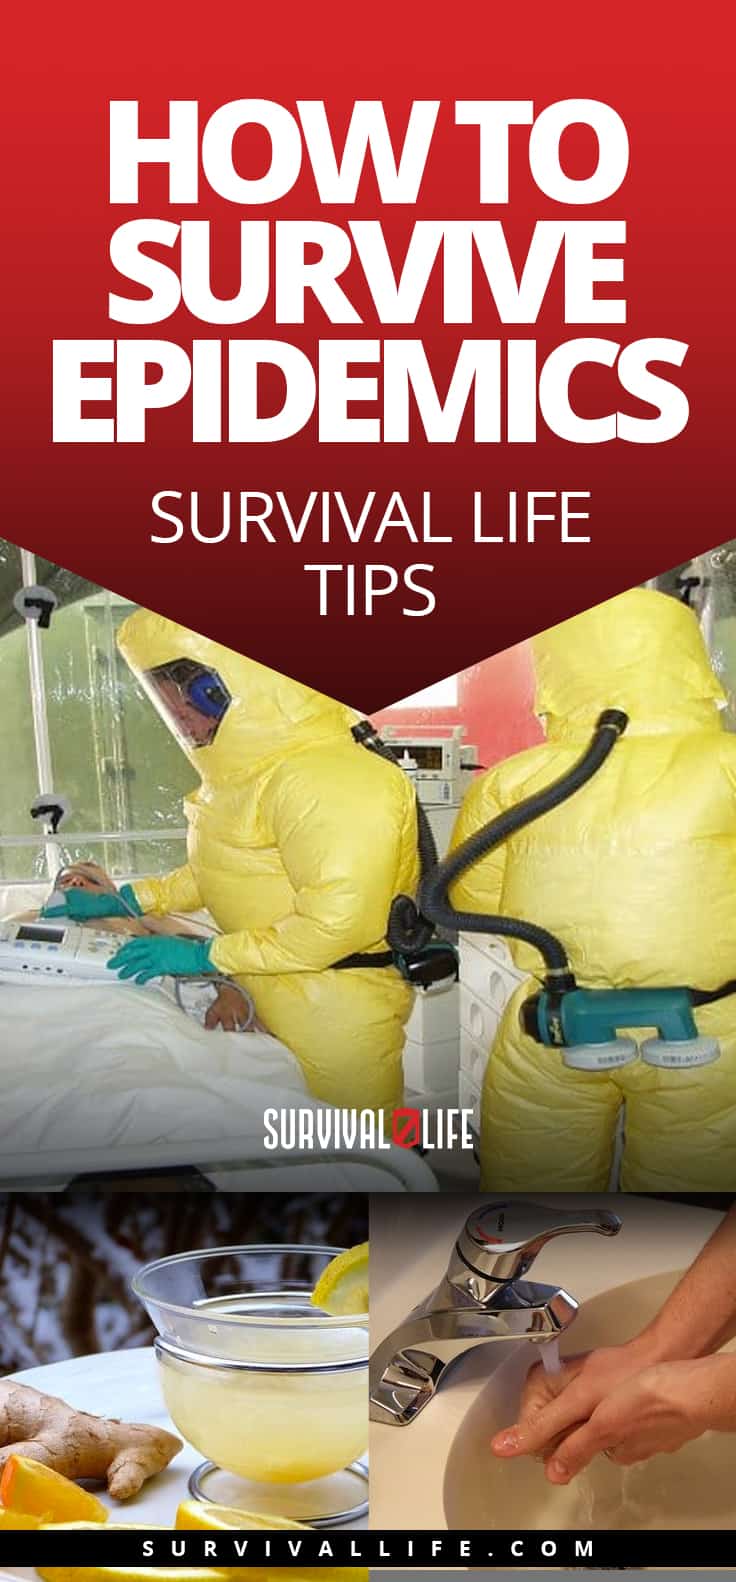 How To Survive Epidemics | Survival Life Tips